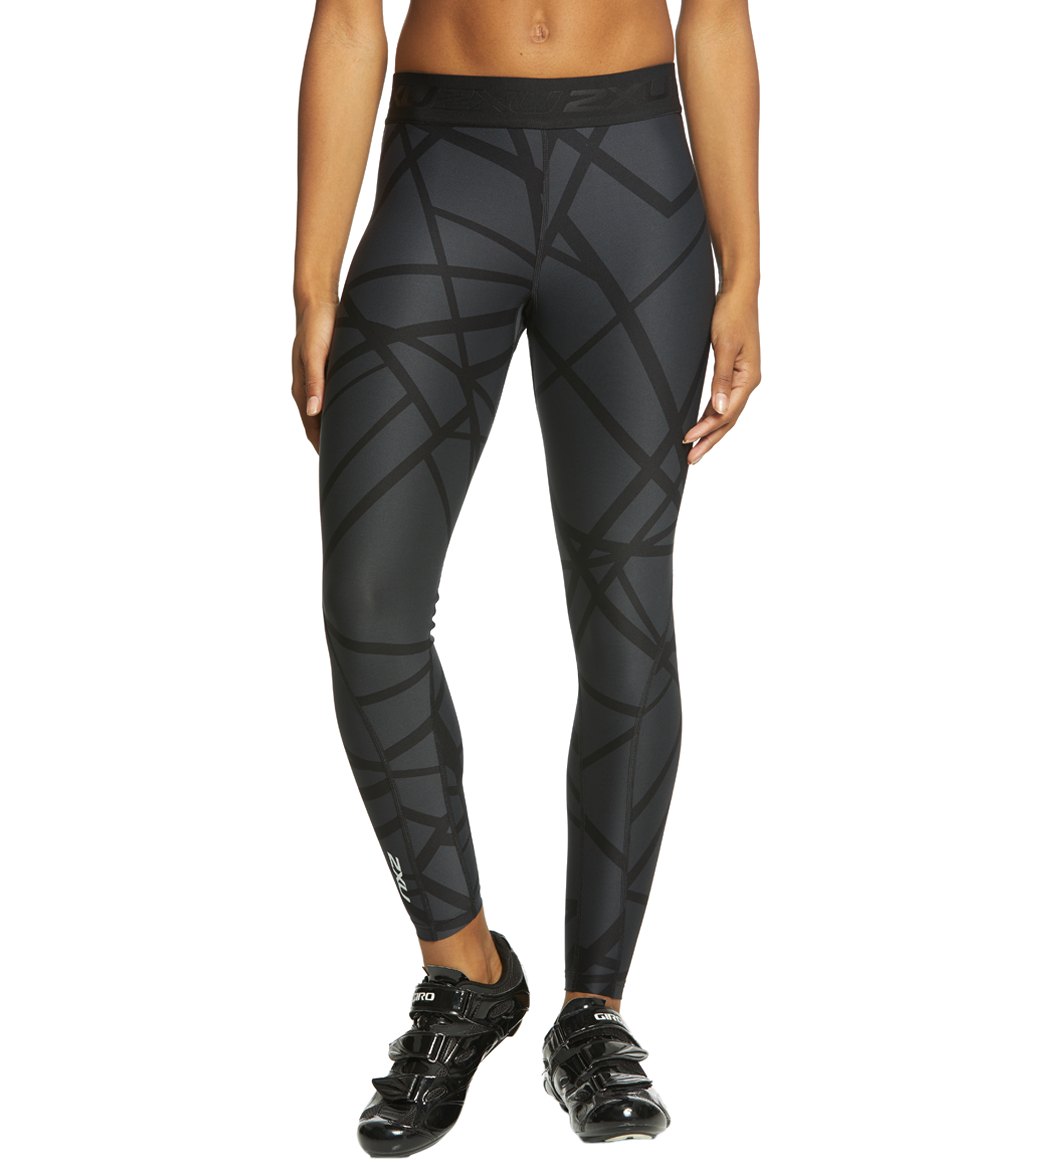 2XU Women's Print Accelerate Compression Tights at SwimOutlet.com